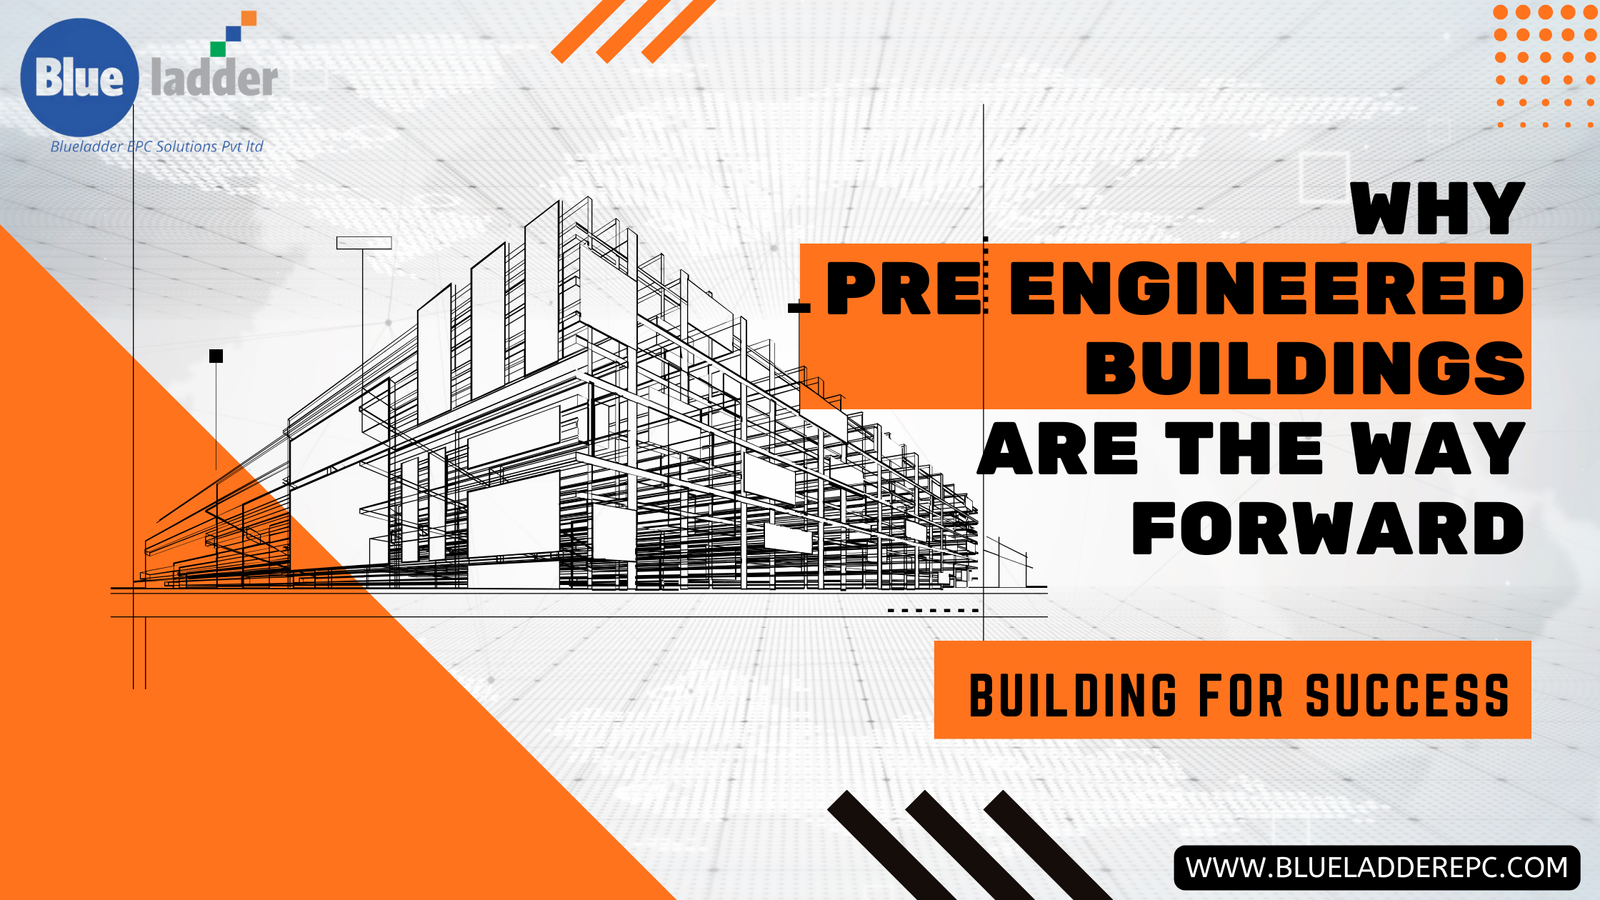 BlueLadder top PEB company in India, delivering excellence in pre-engineered building design and construction.